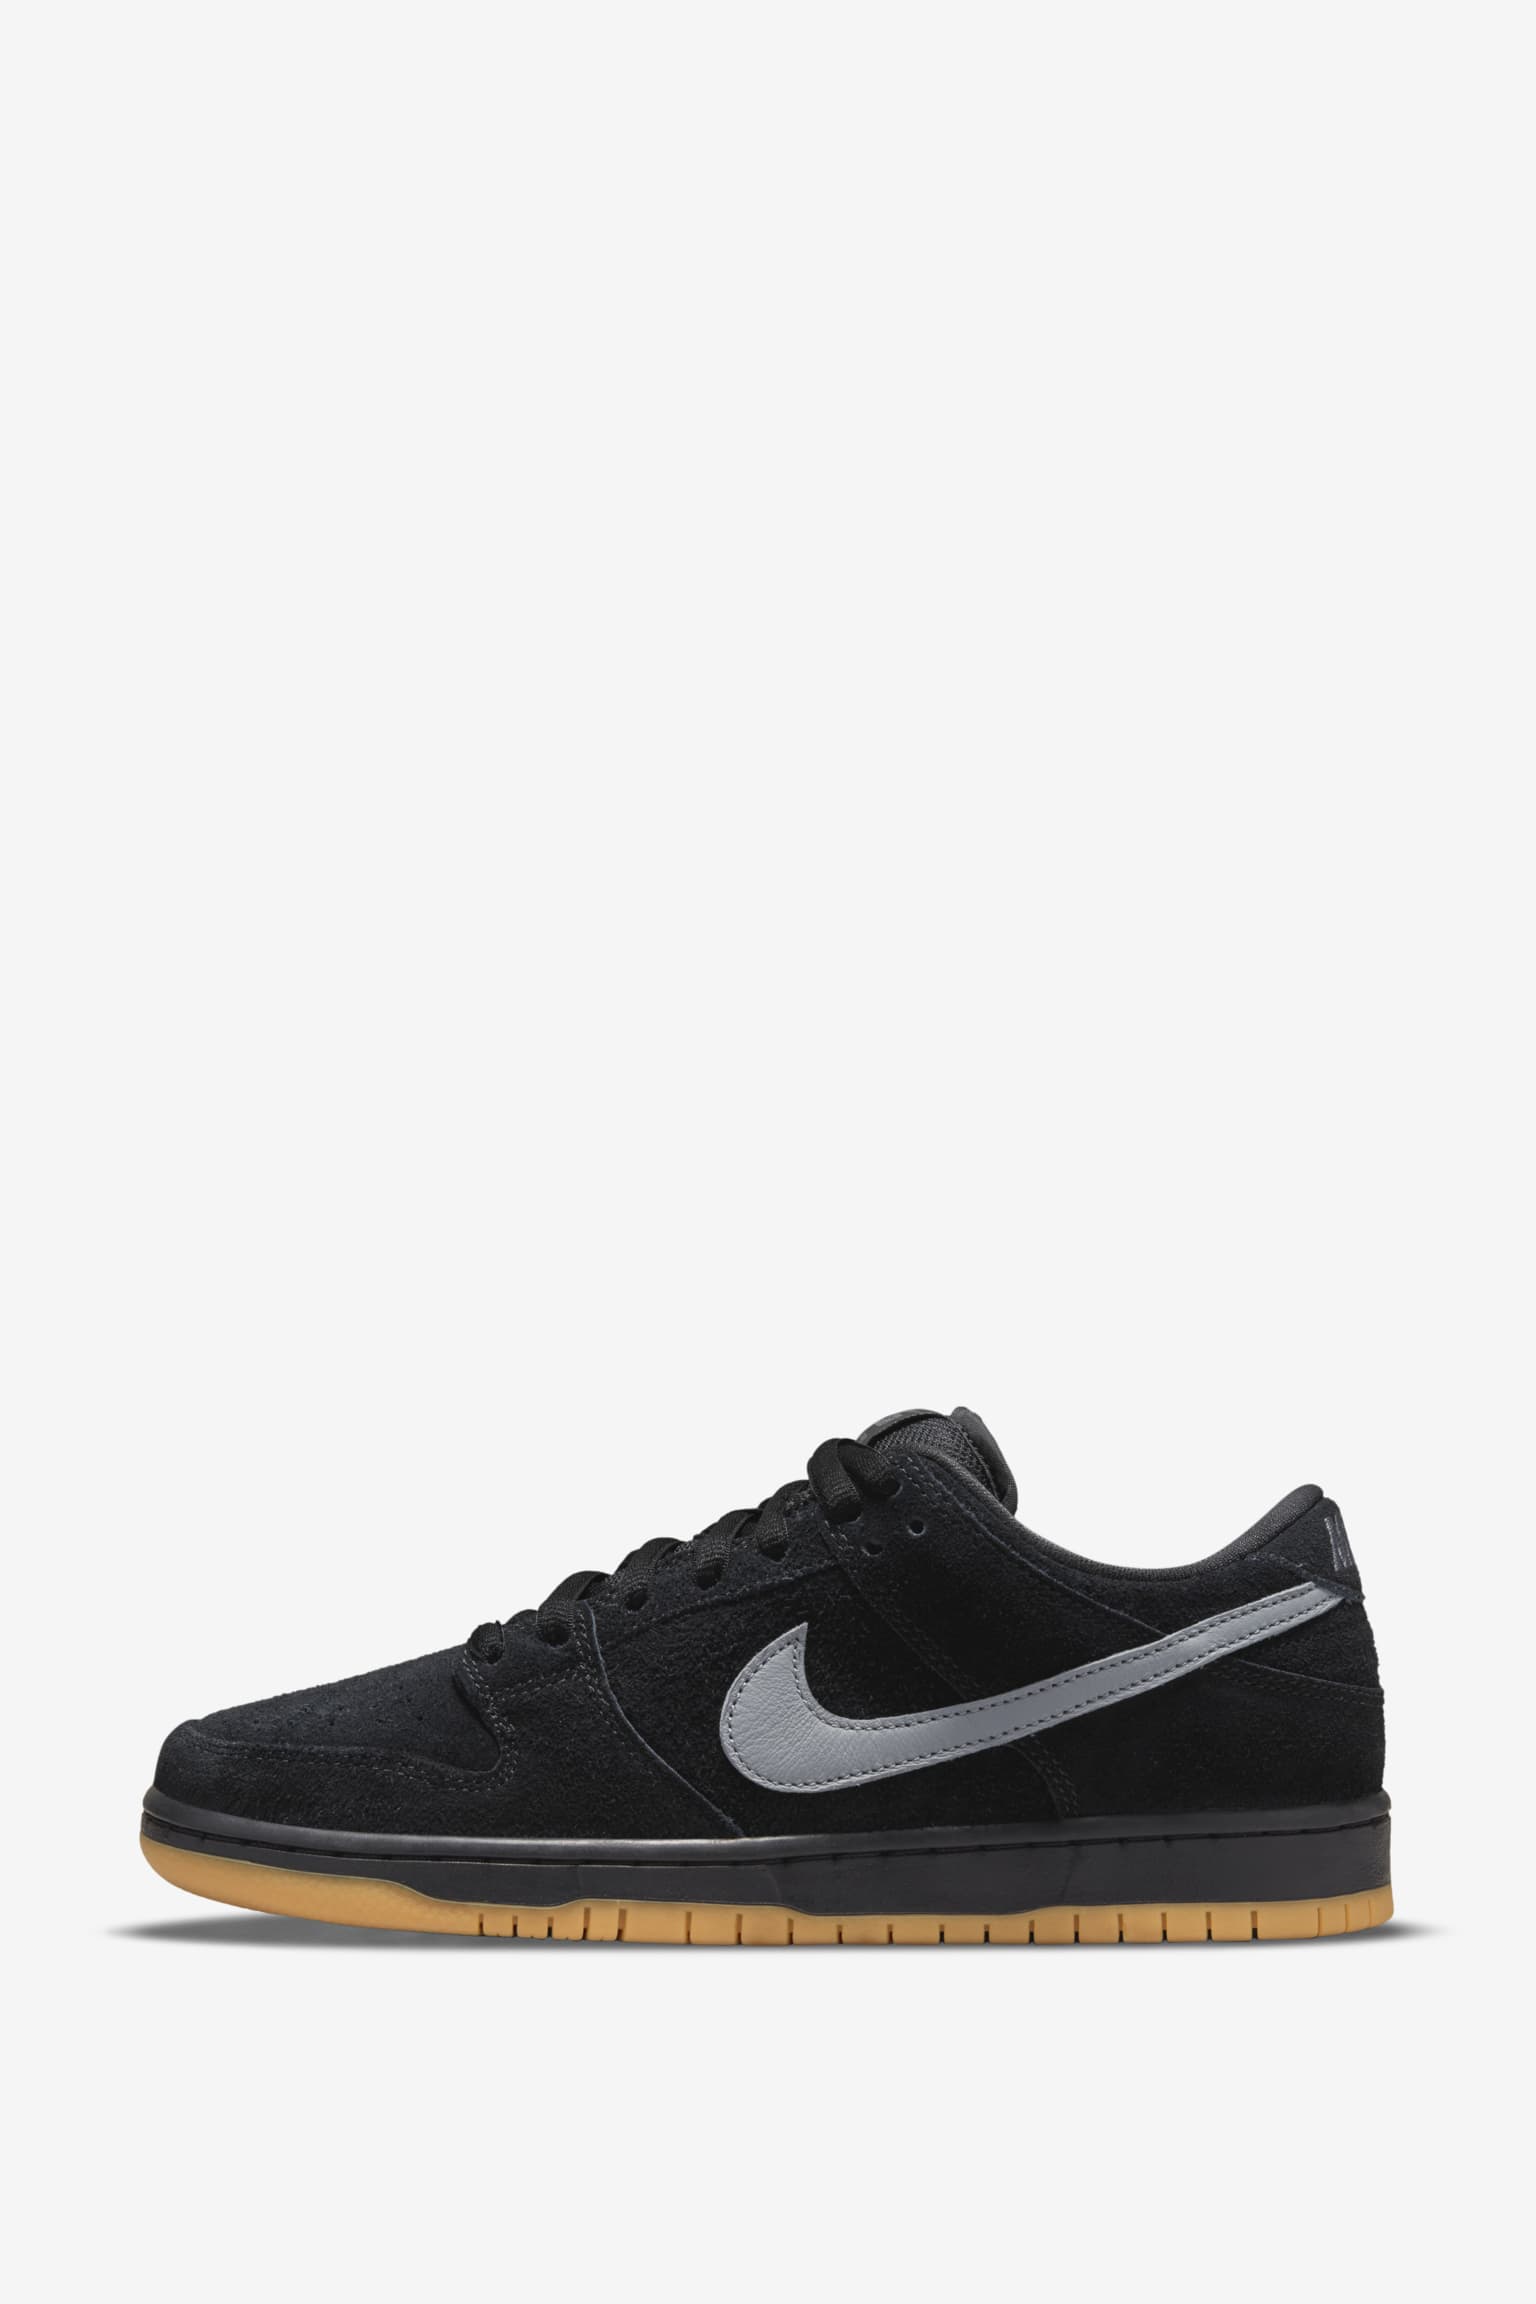 nike dunks low for sale